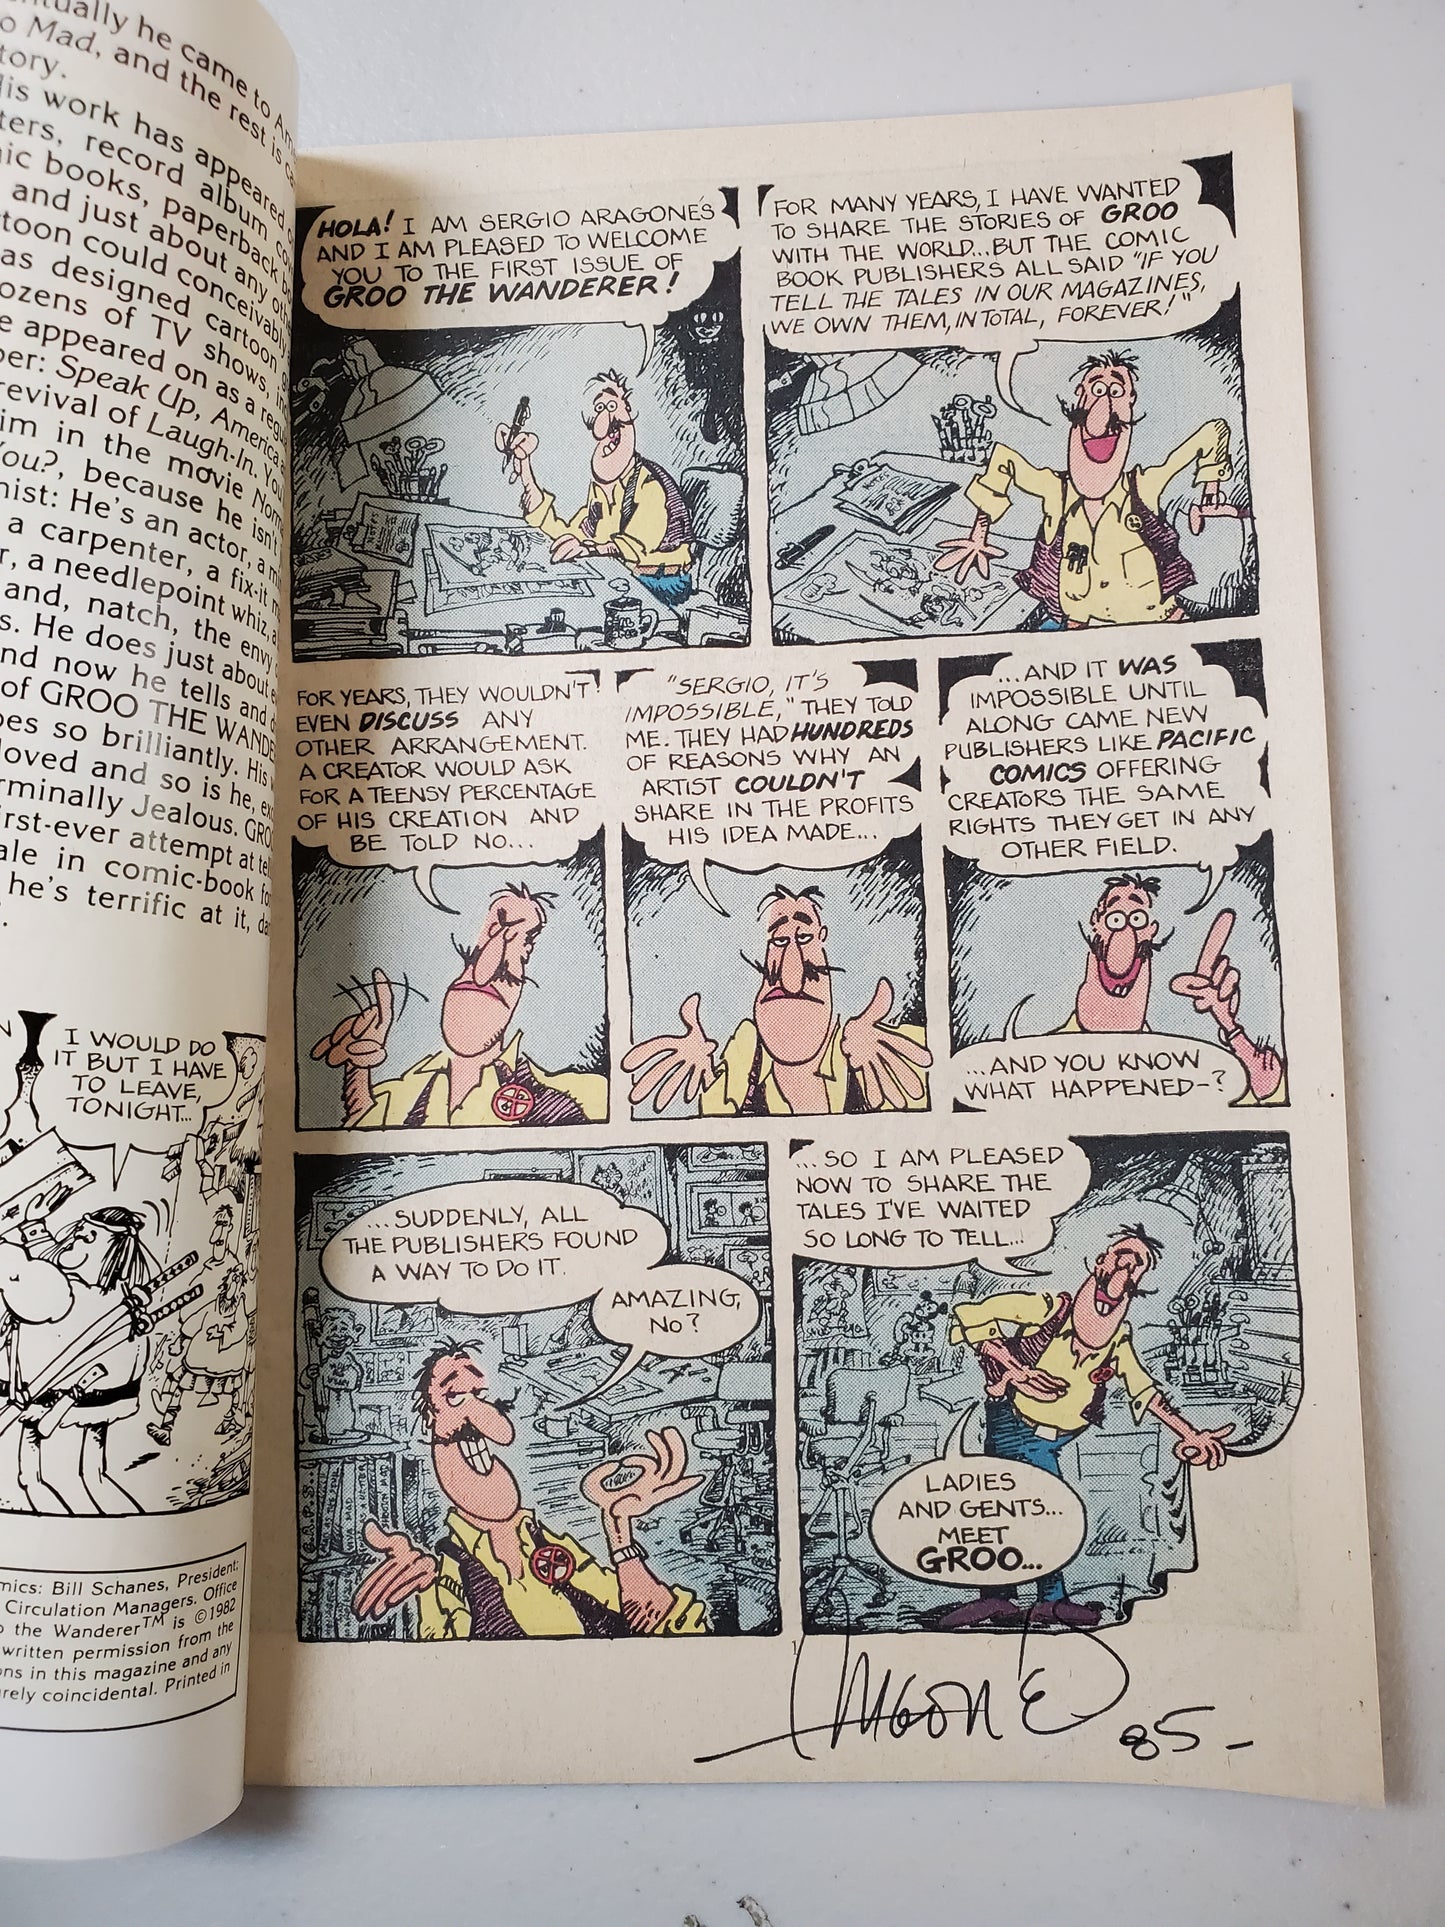 GROO THE WANDERER #1 SIGNED BY SERGIO ARAGONES (INTERIOR PAGE)